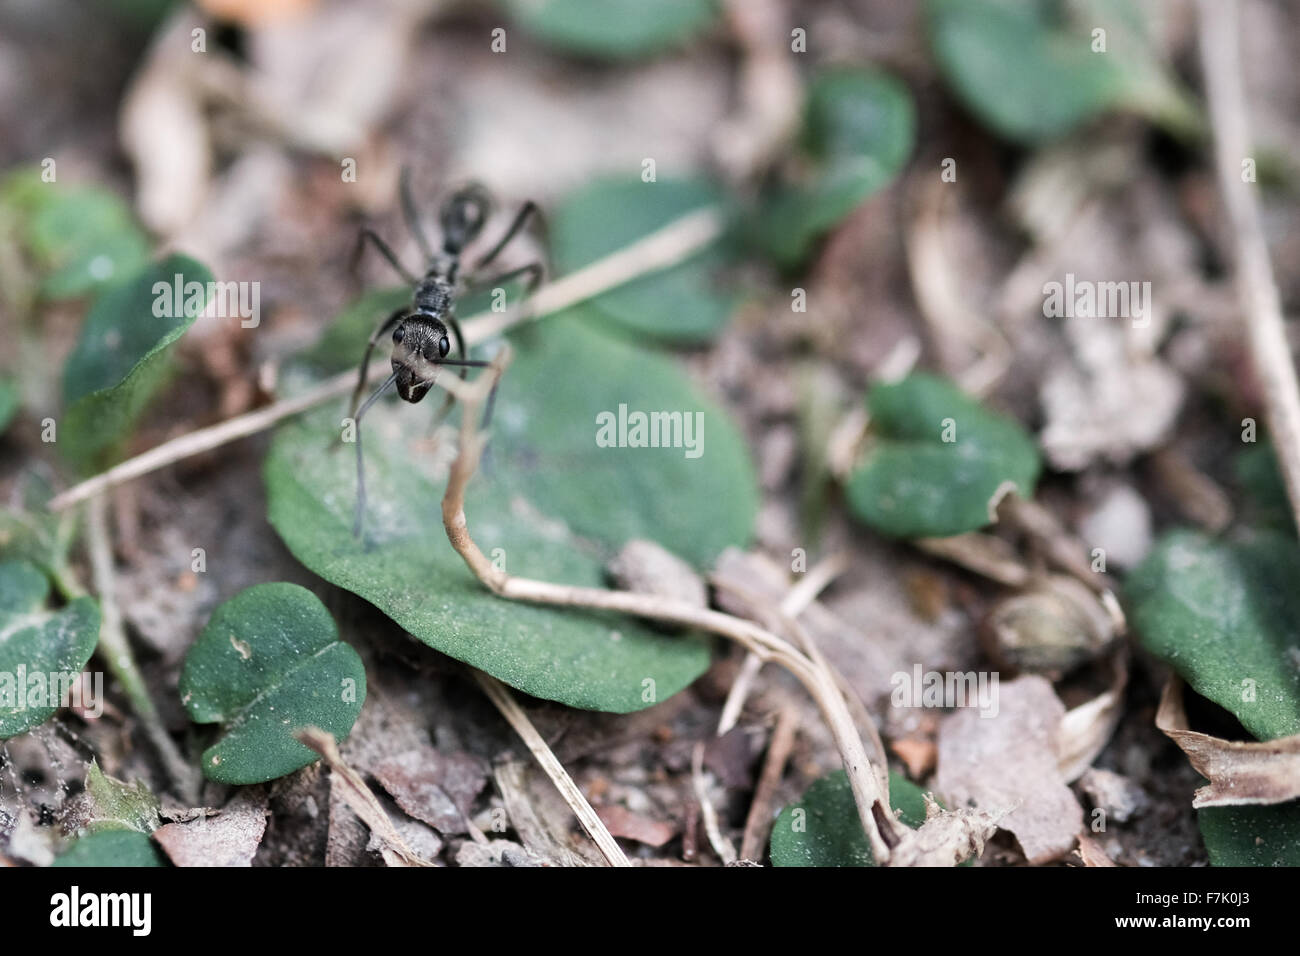 Black ant running on the forest ground Stock Photo